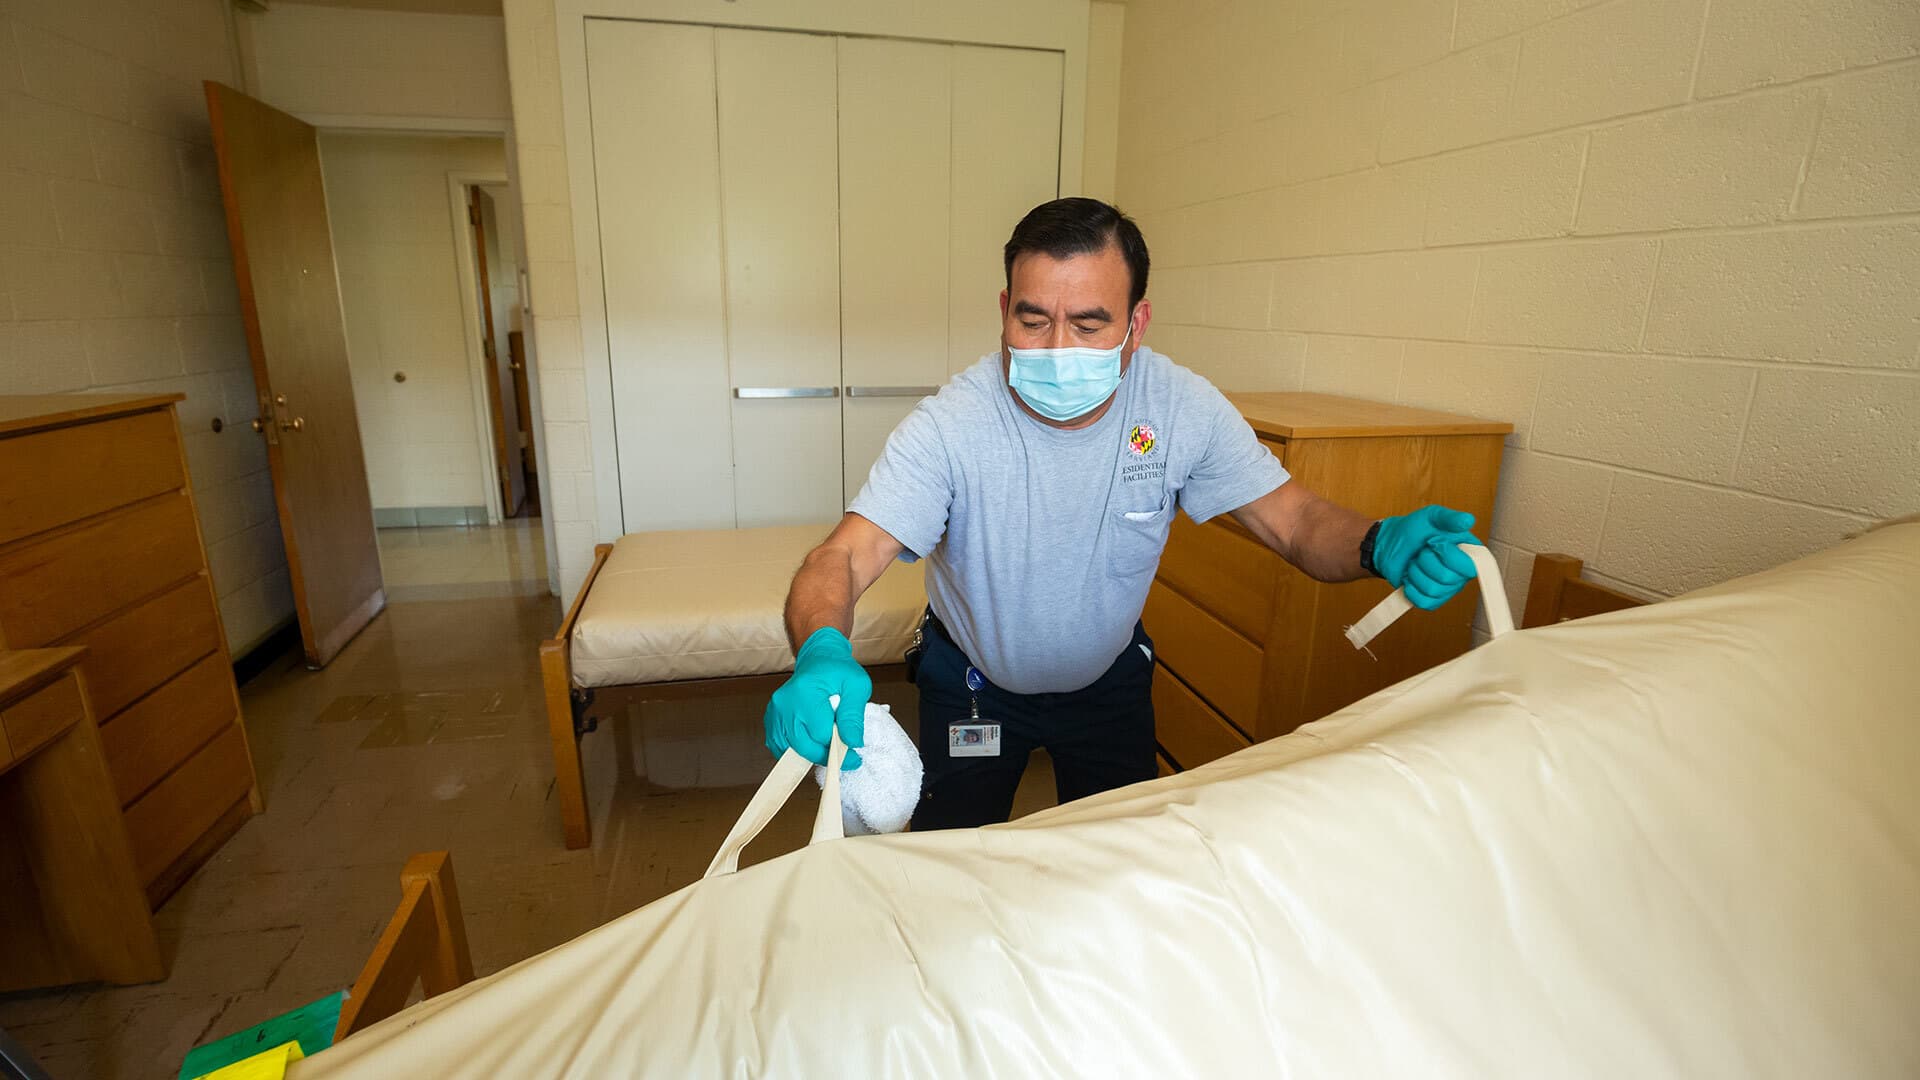 Department of Residential Facilities staff member Pedro Rodriguez cleans a room in Cumberland Hall.